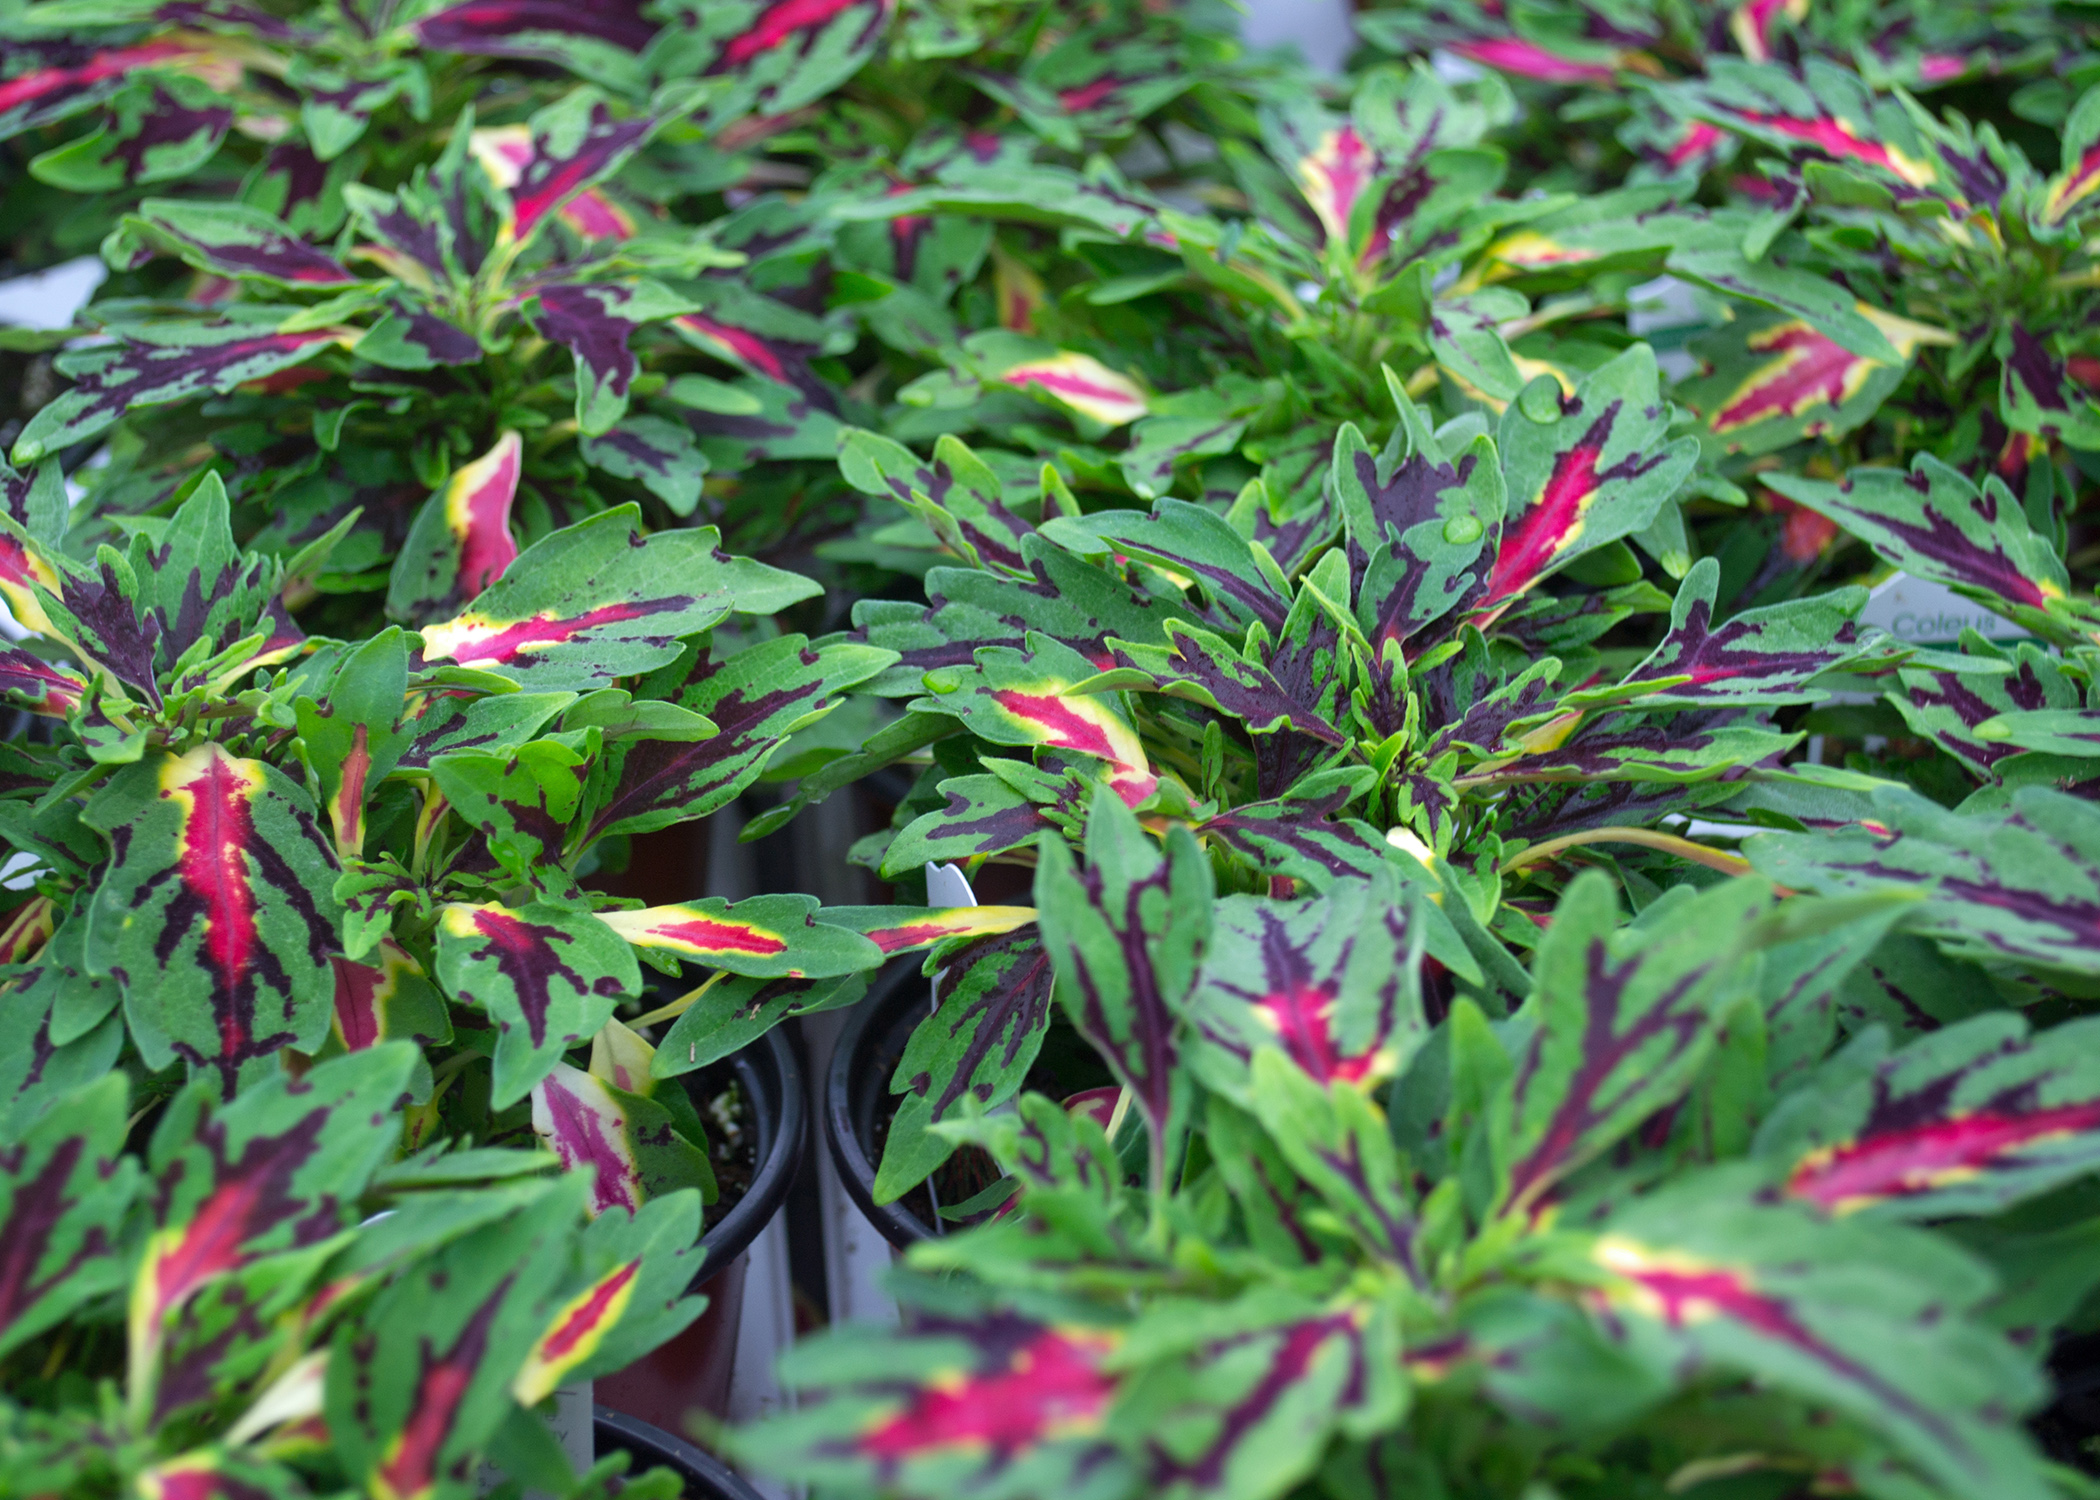 Plants with green and pink leaves grow in small pots.